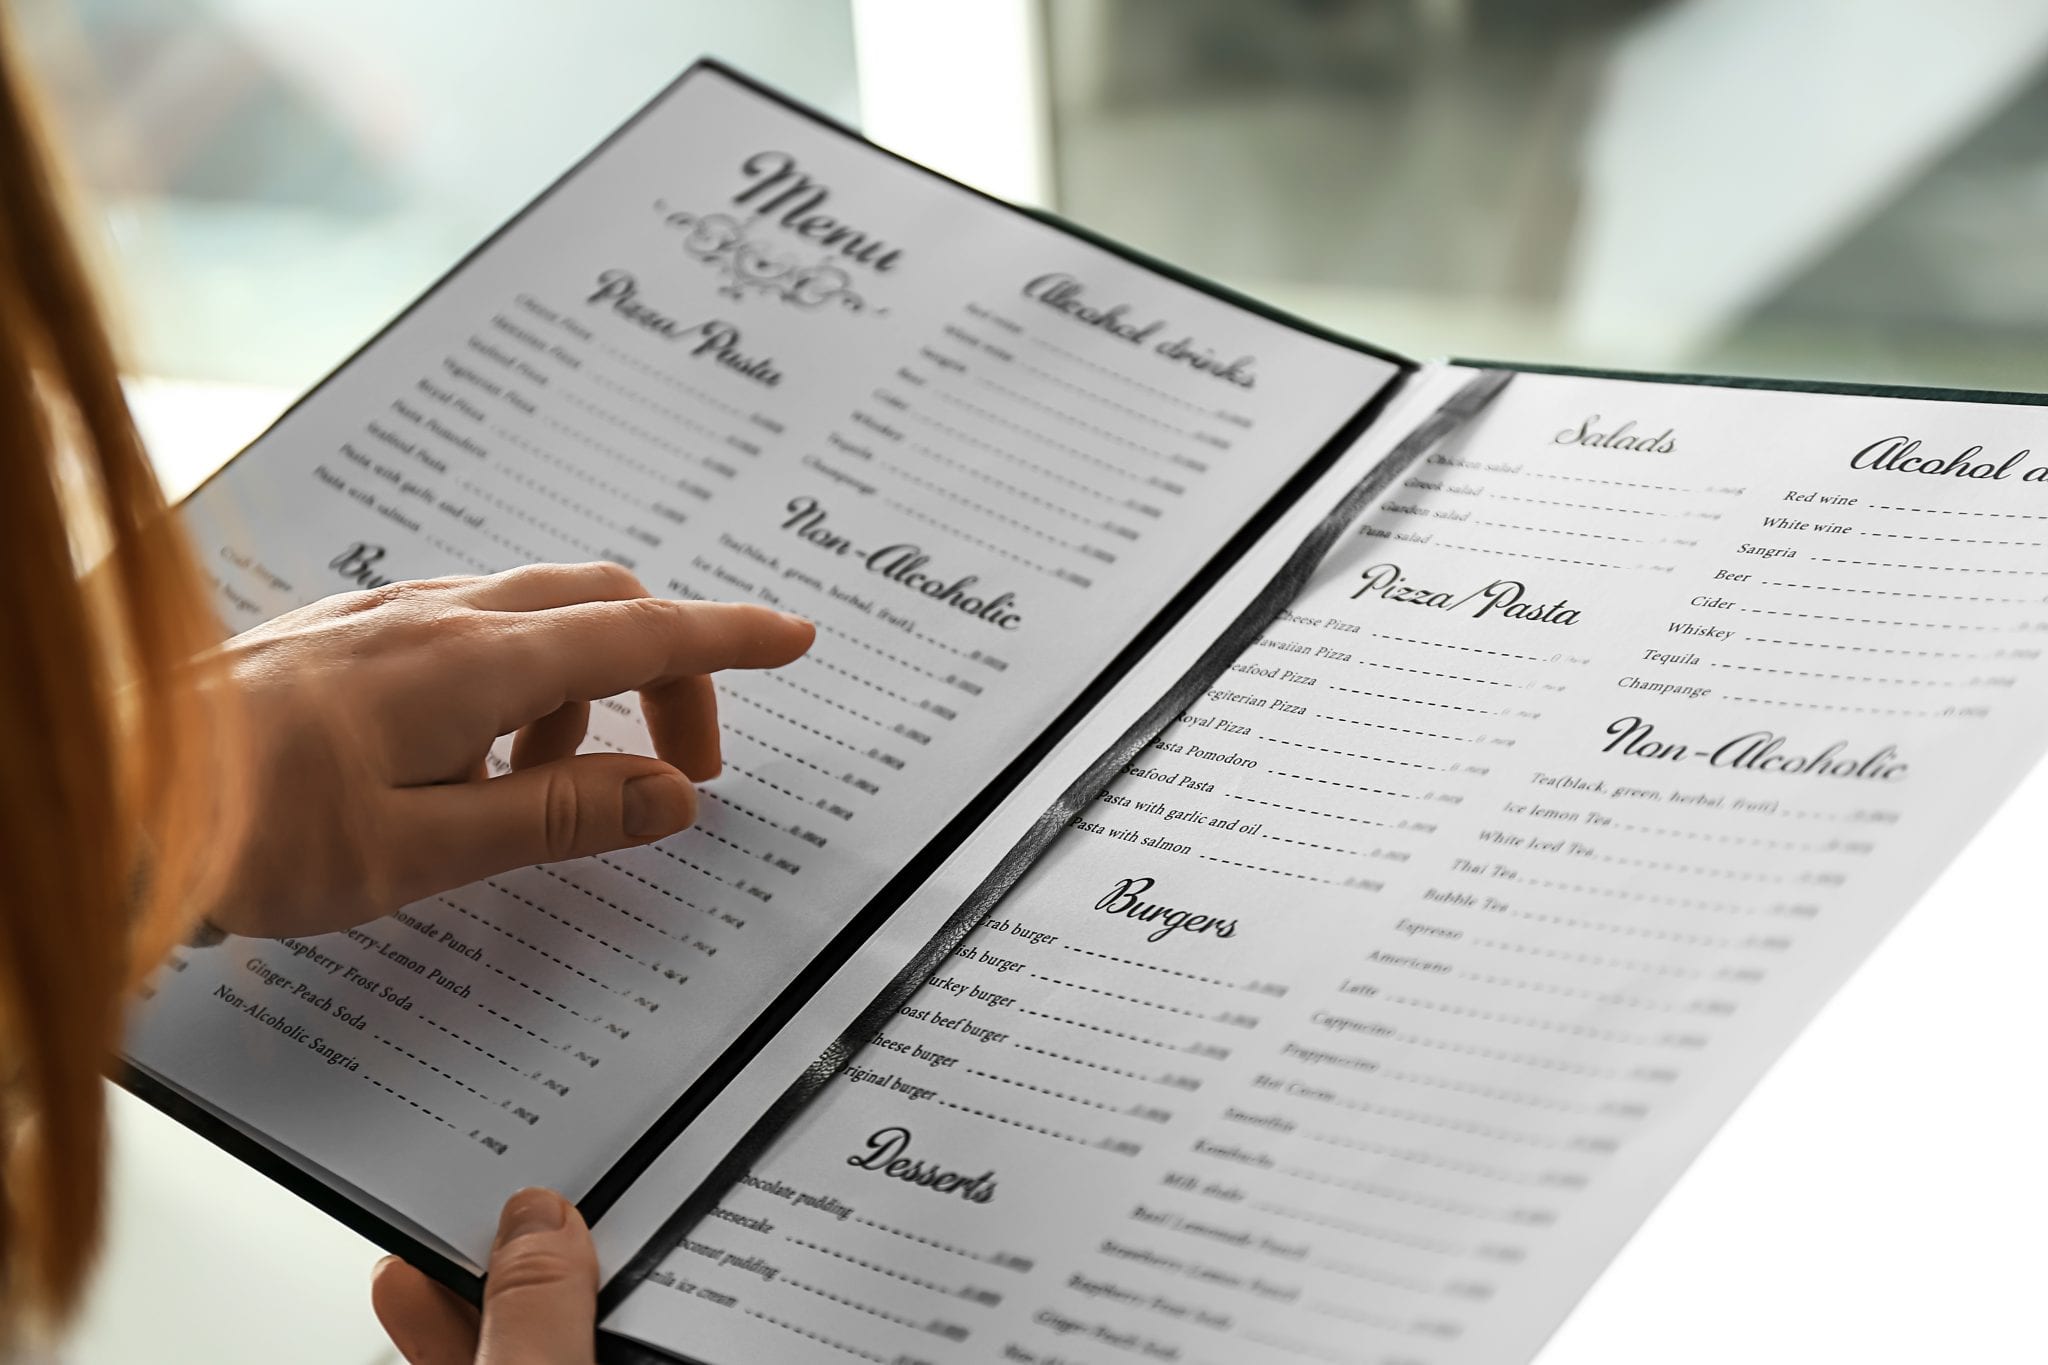 Will calorie information appear on all the menus in the UK?